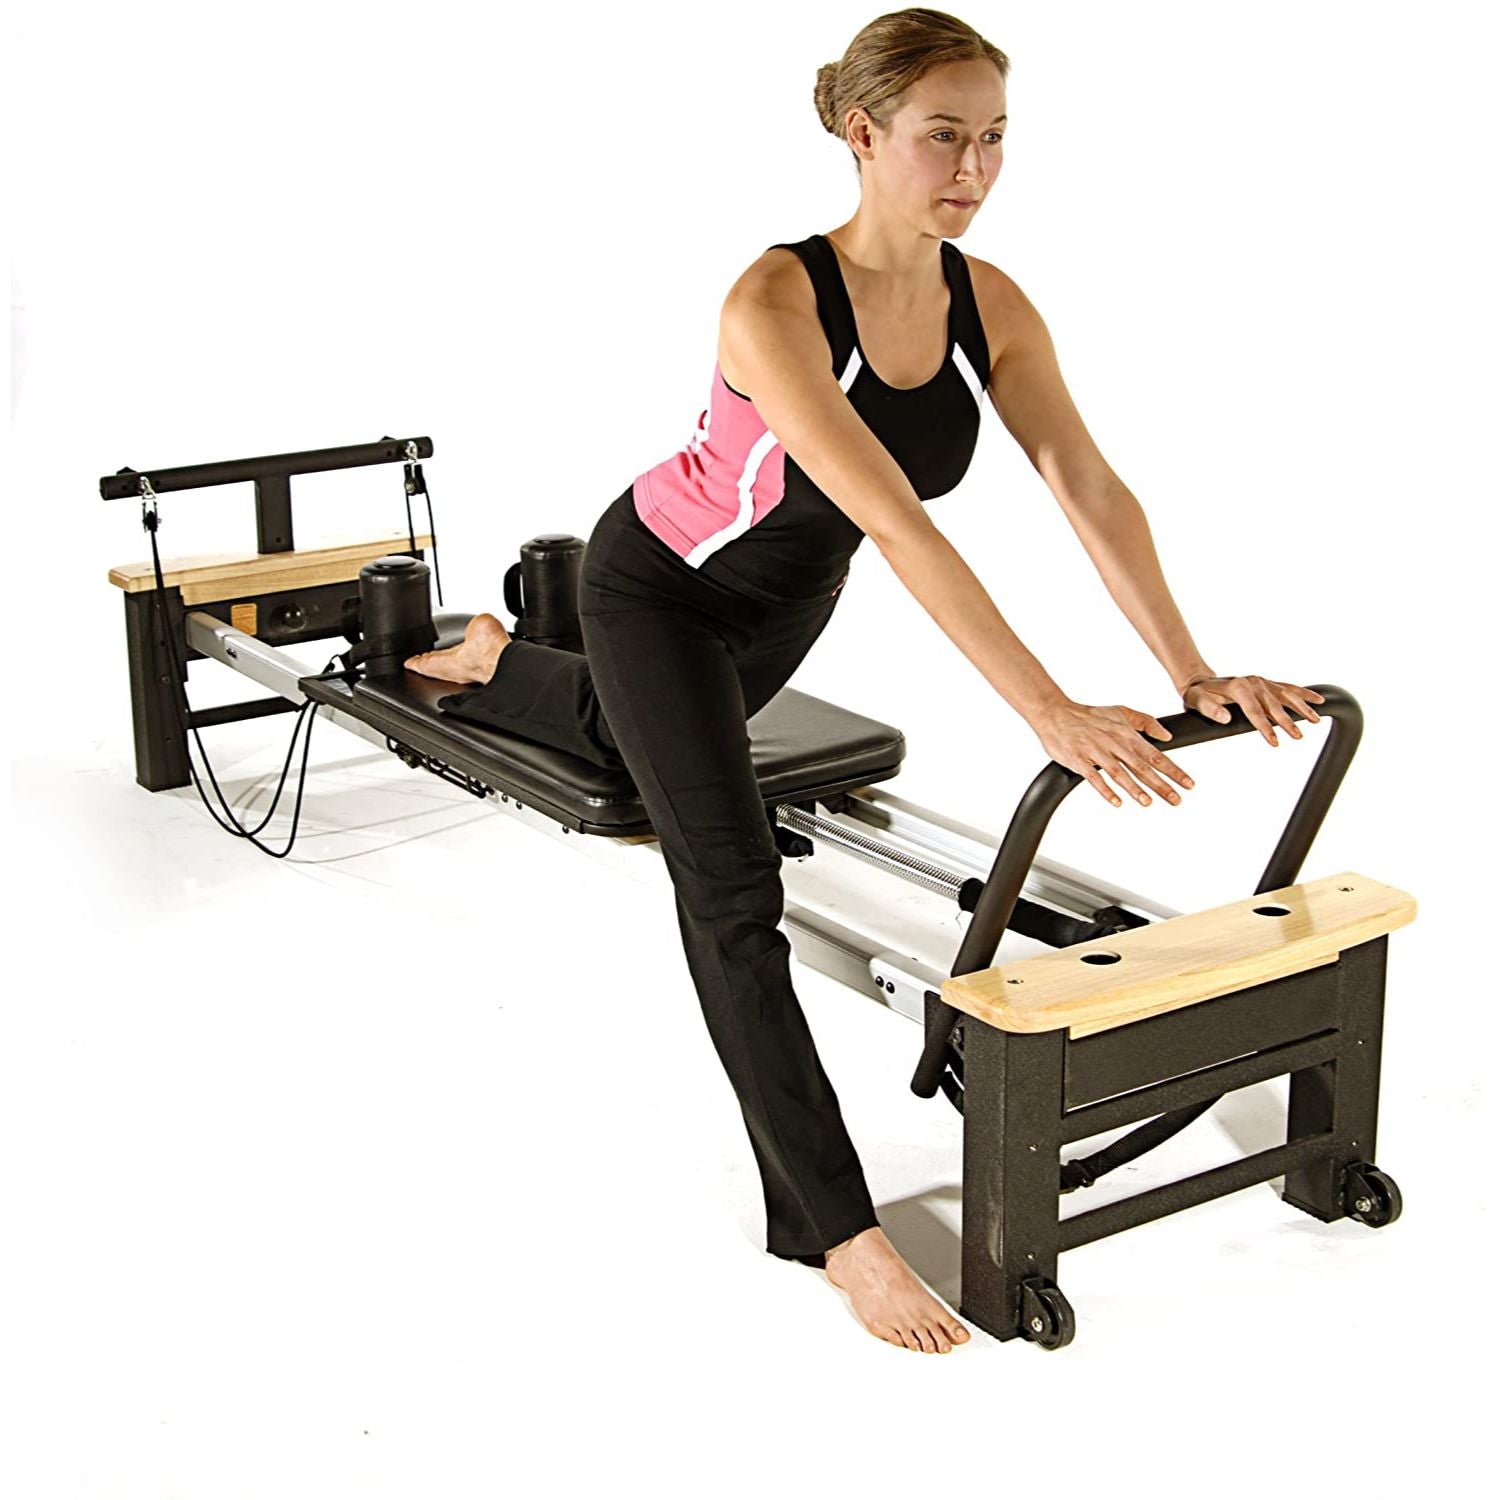 Professional oem pilates reformer For Workouts 